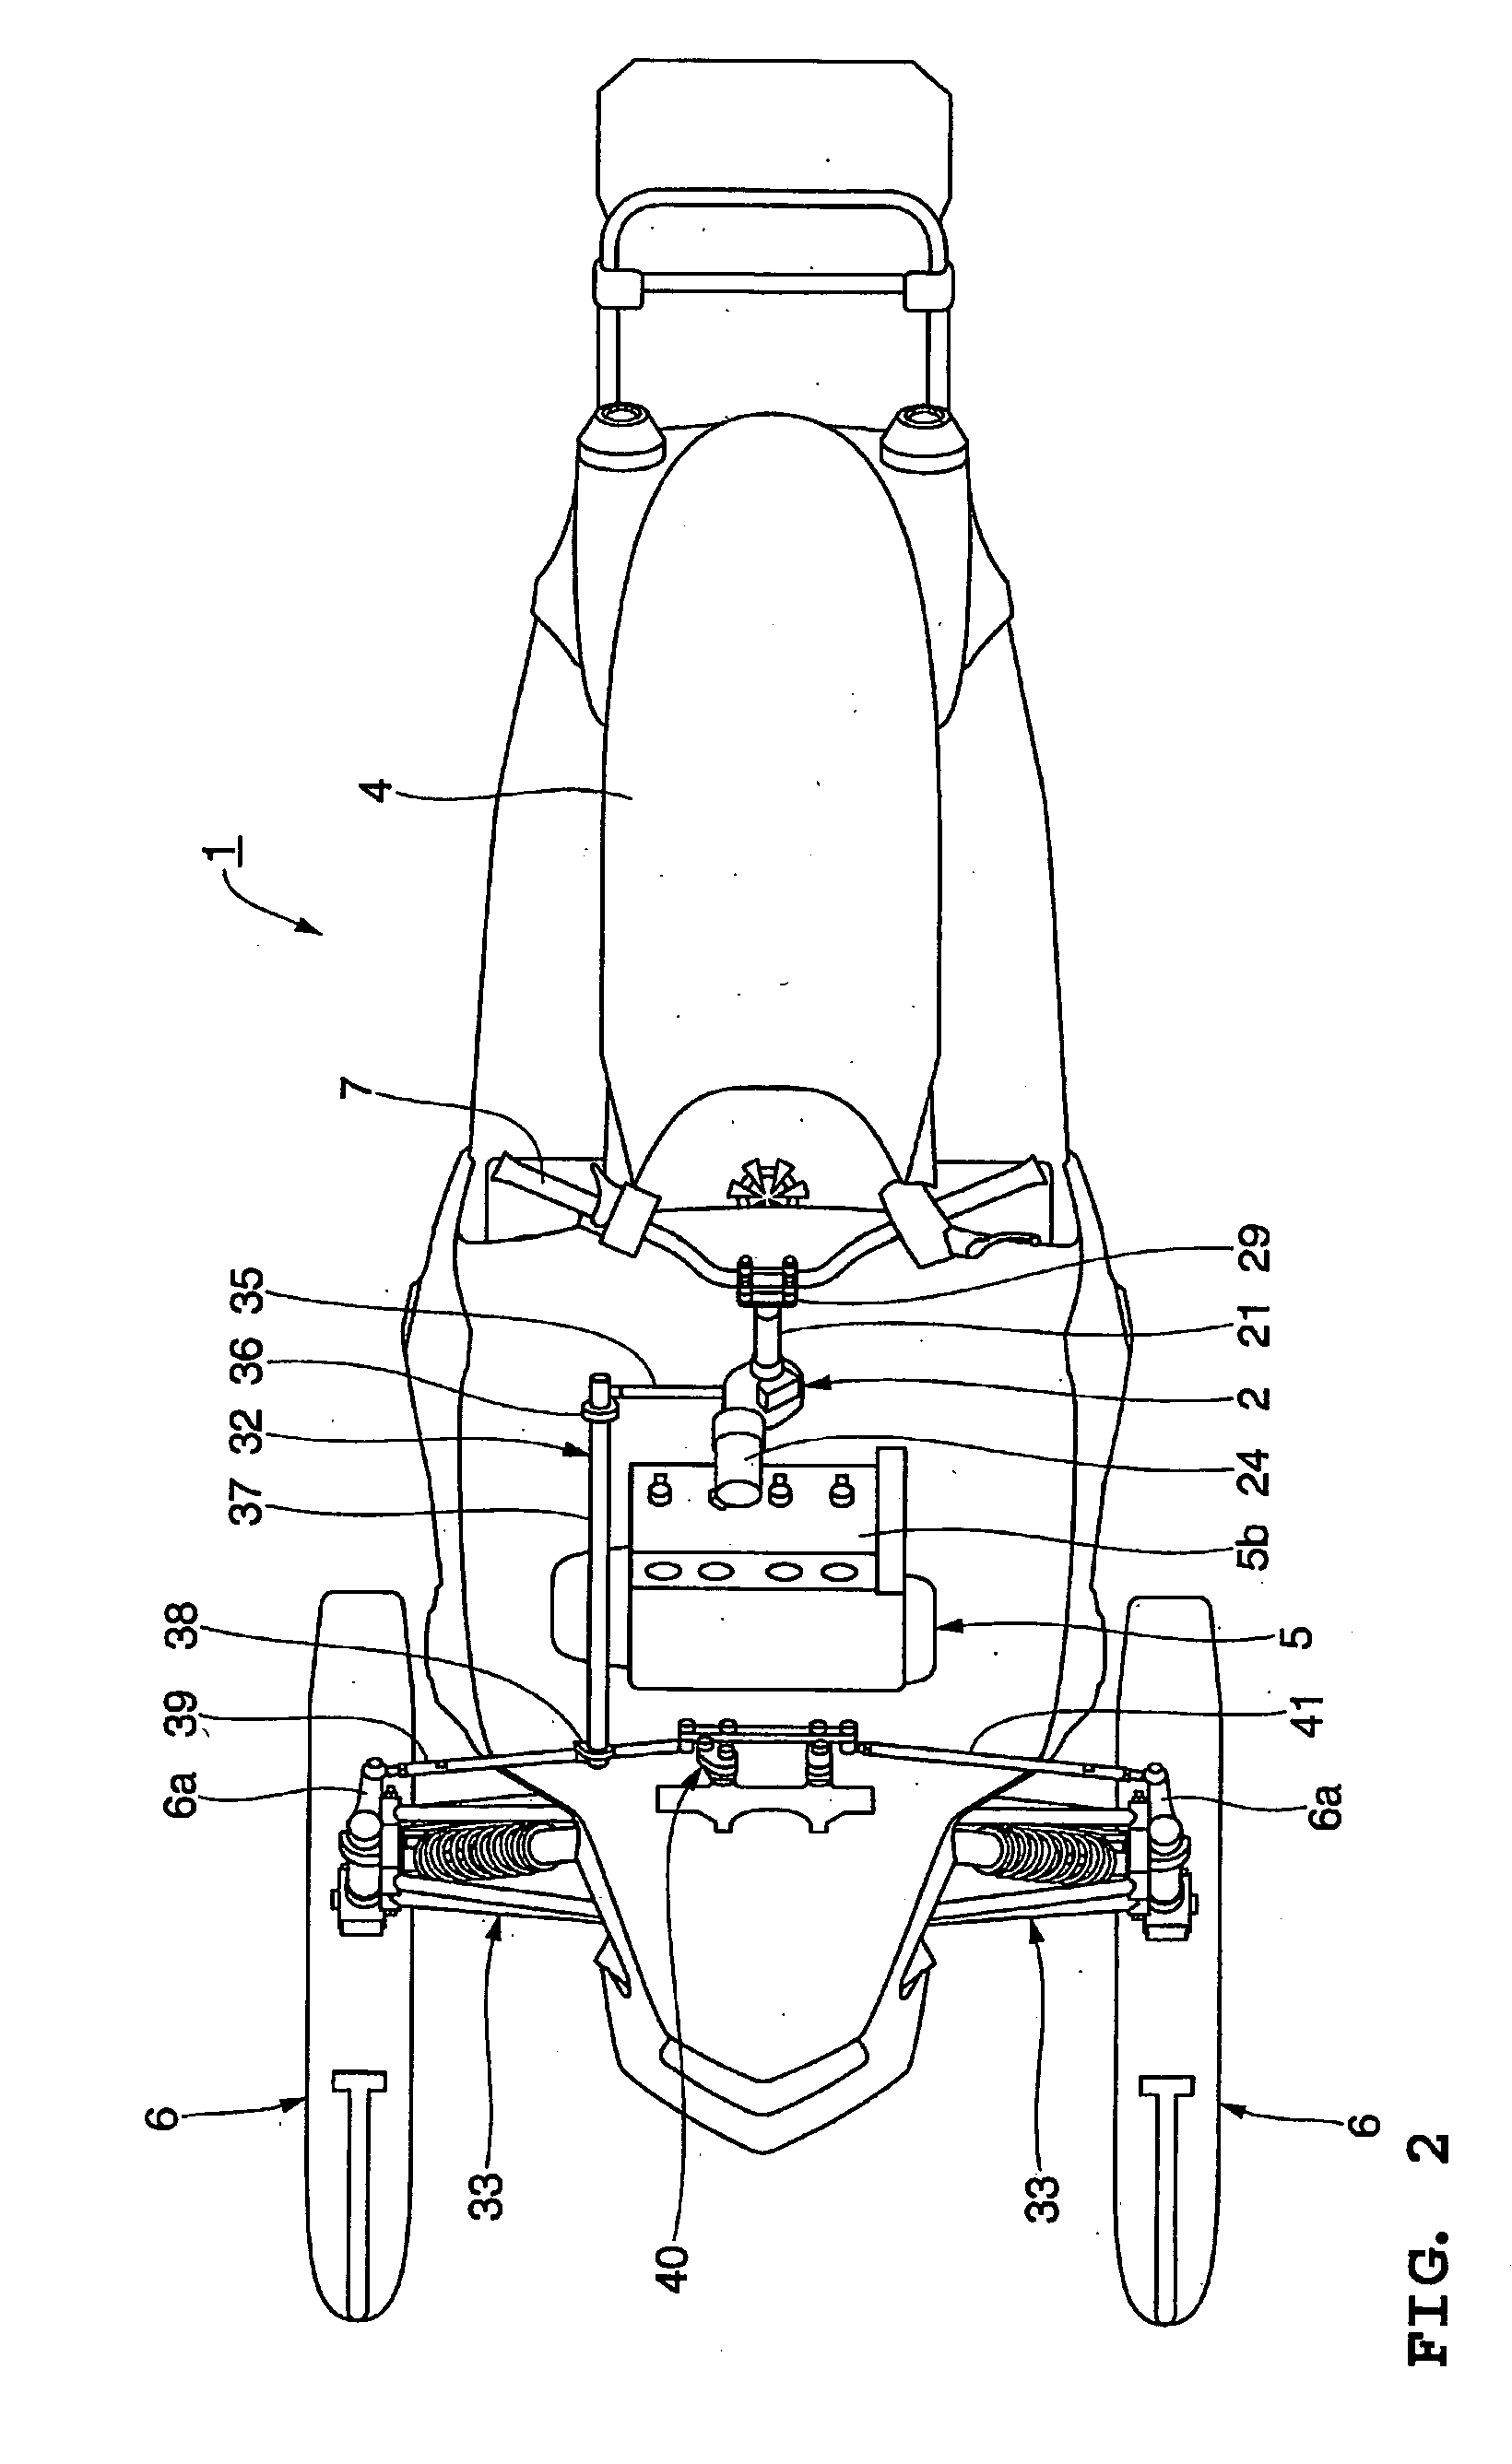 Snowmobile power steering system